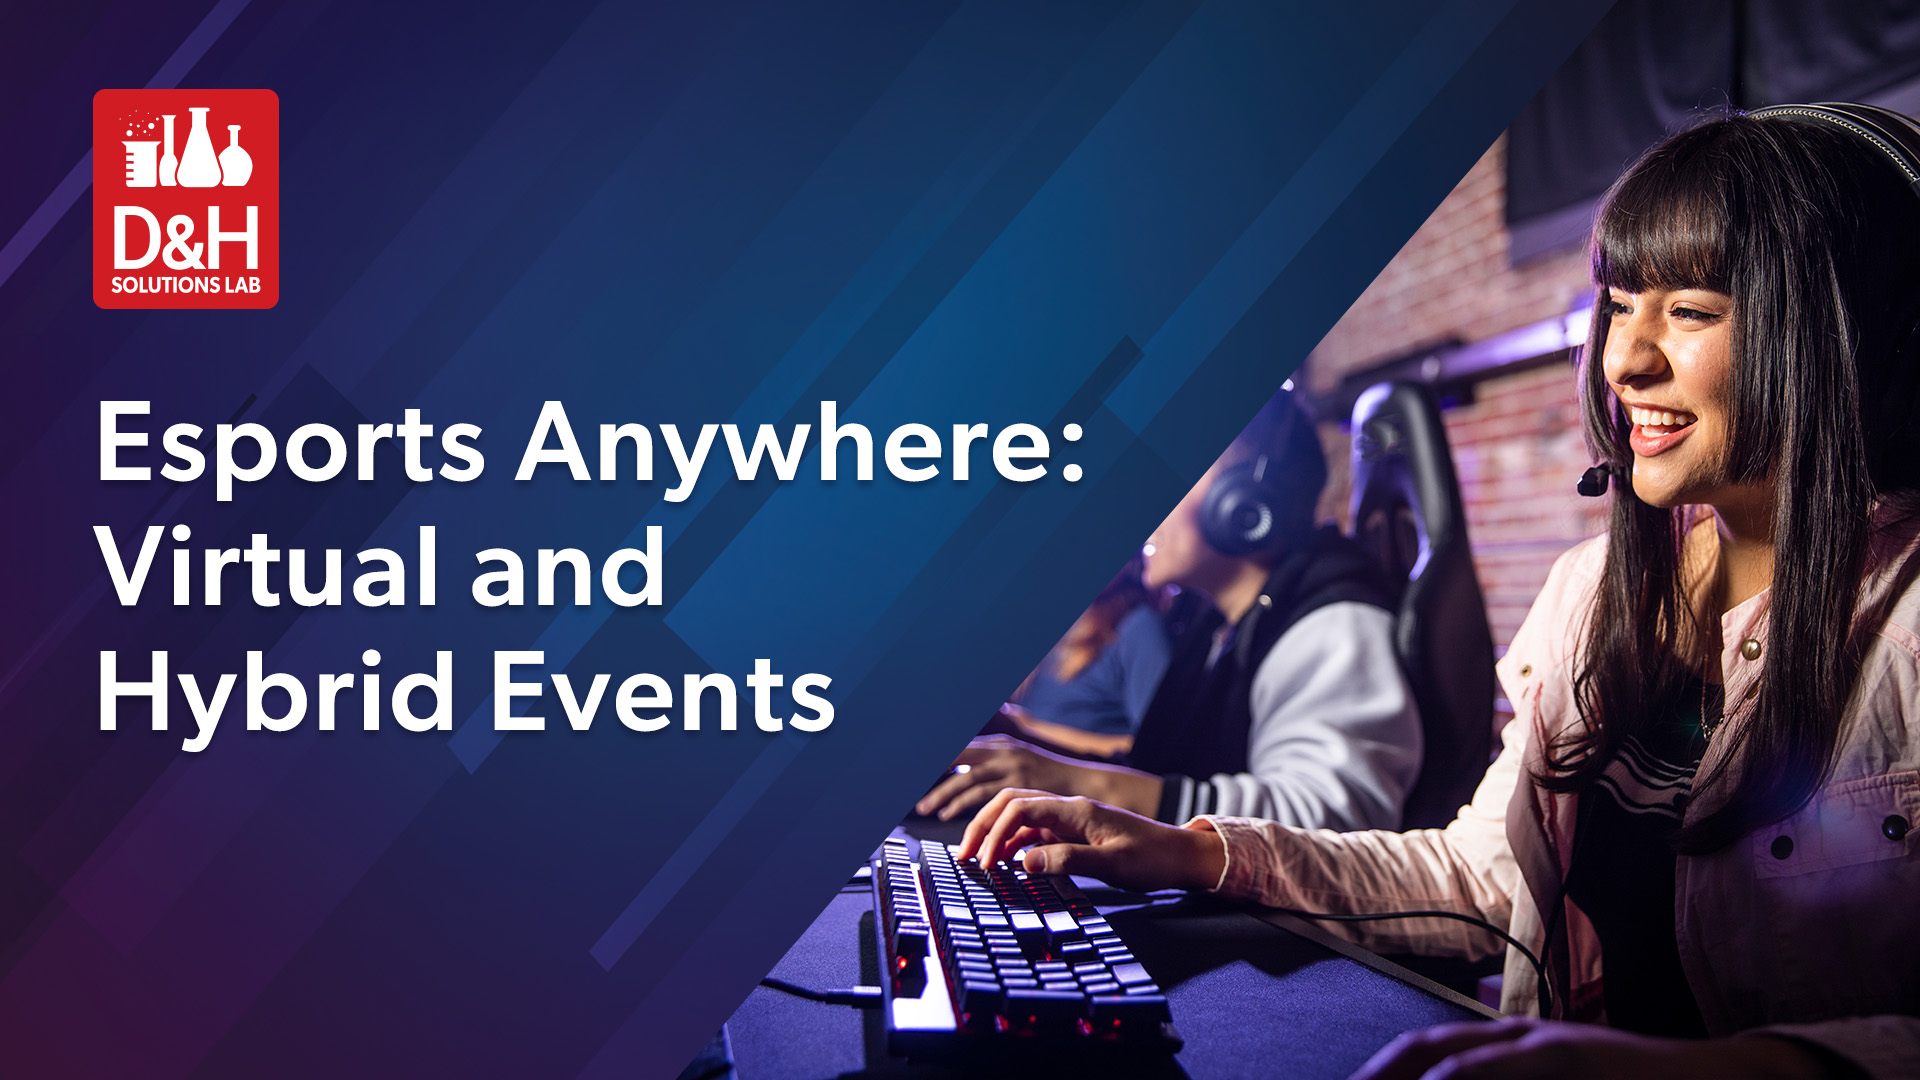 Esports Anywhere: Virtual and Hybrid Events